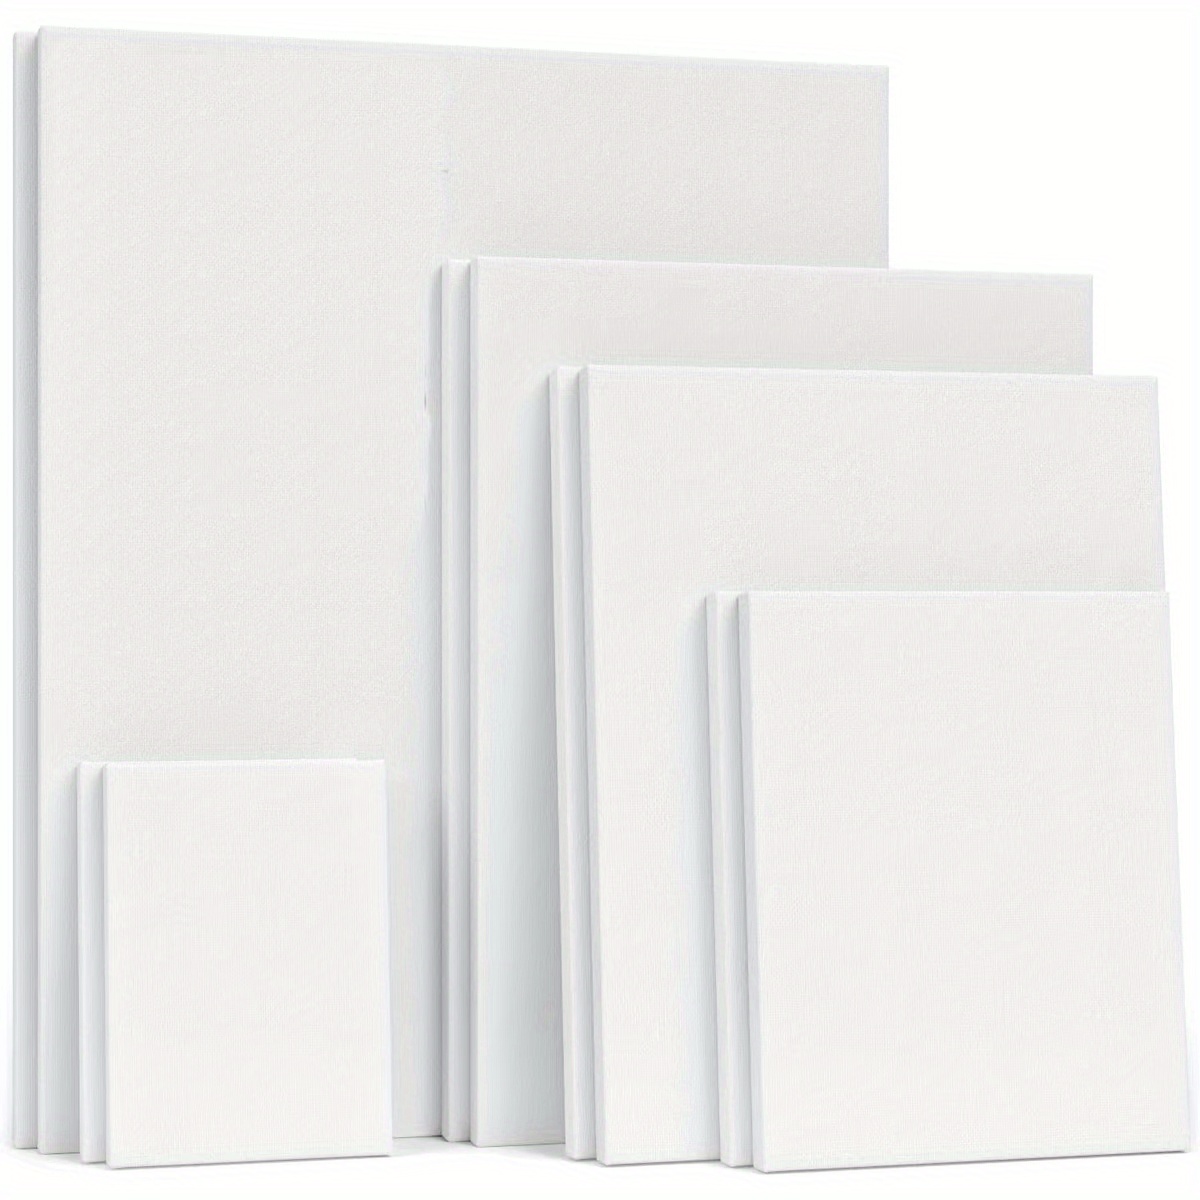 Thyle 9 Pack Large Stretched Canvas for Painting 30 x 40, 24 x 36, 20 x 24  Blank Canvas White 100% Cotton Profile Painting Canvas Primed Framed Canvas